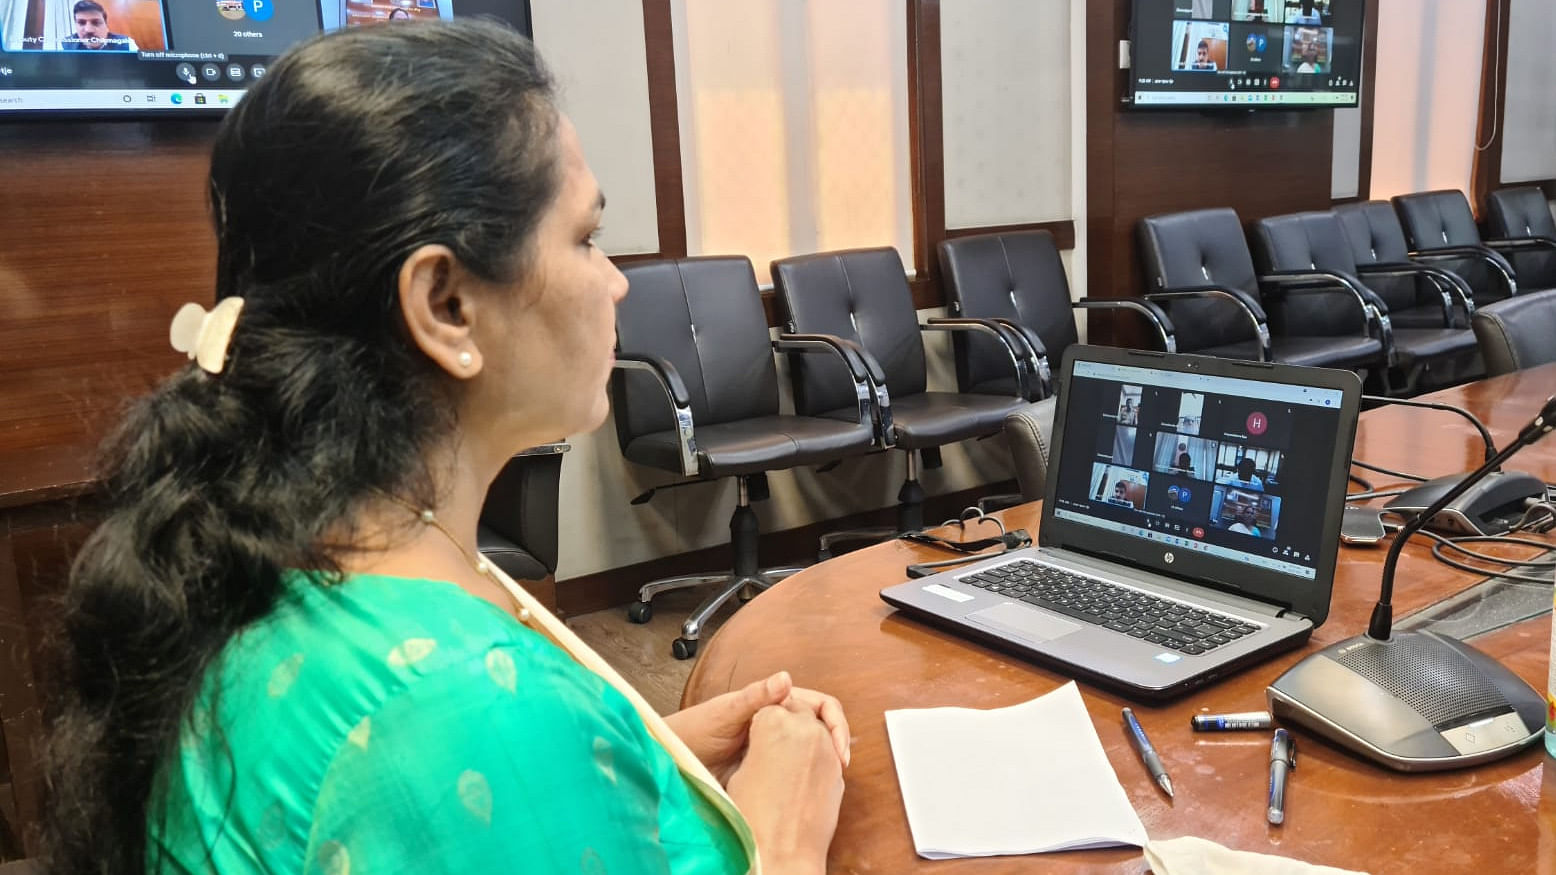 Minister of State for Agriculture held video conference with Udupi and Chikkamagaluru Deputy Commissioners and review rain situation. Both the districts received heavy rain for the past few days. Credit: Shobha Karandlaje's office